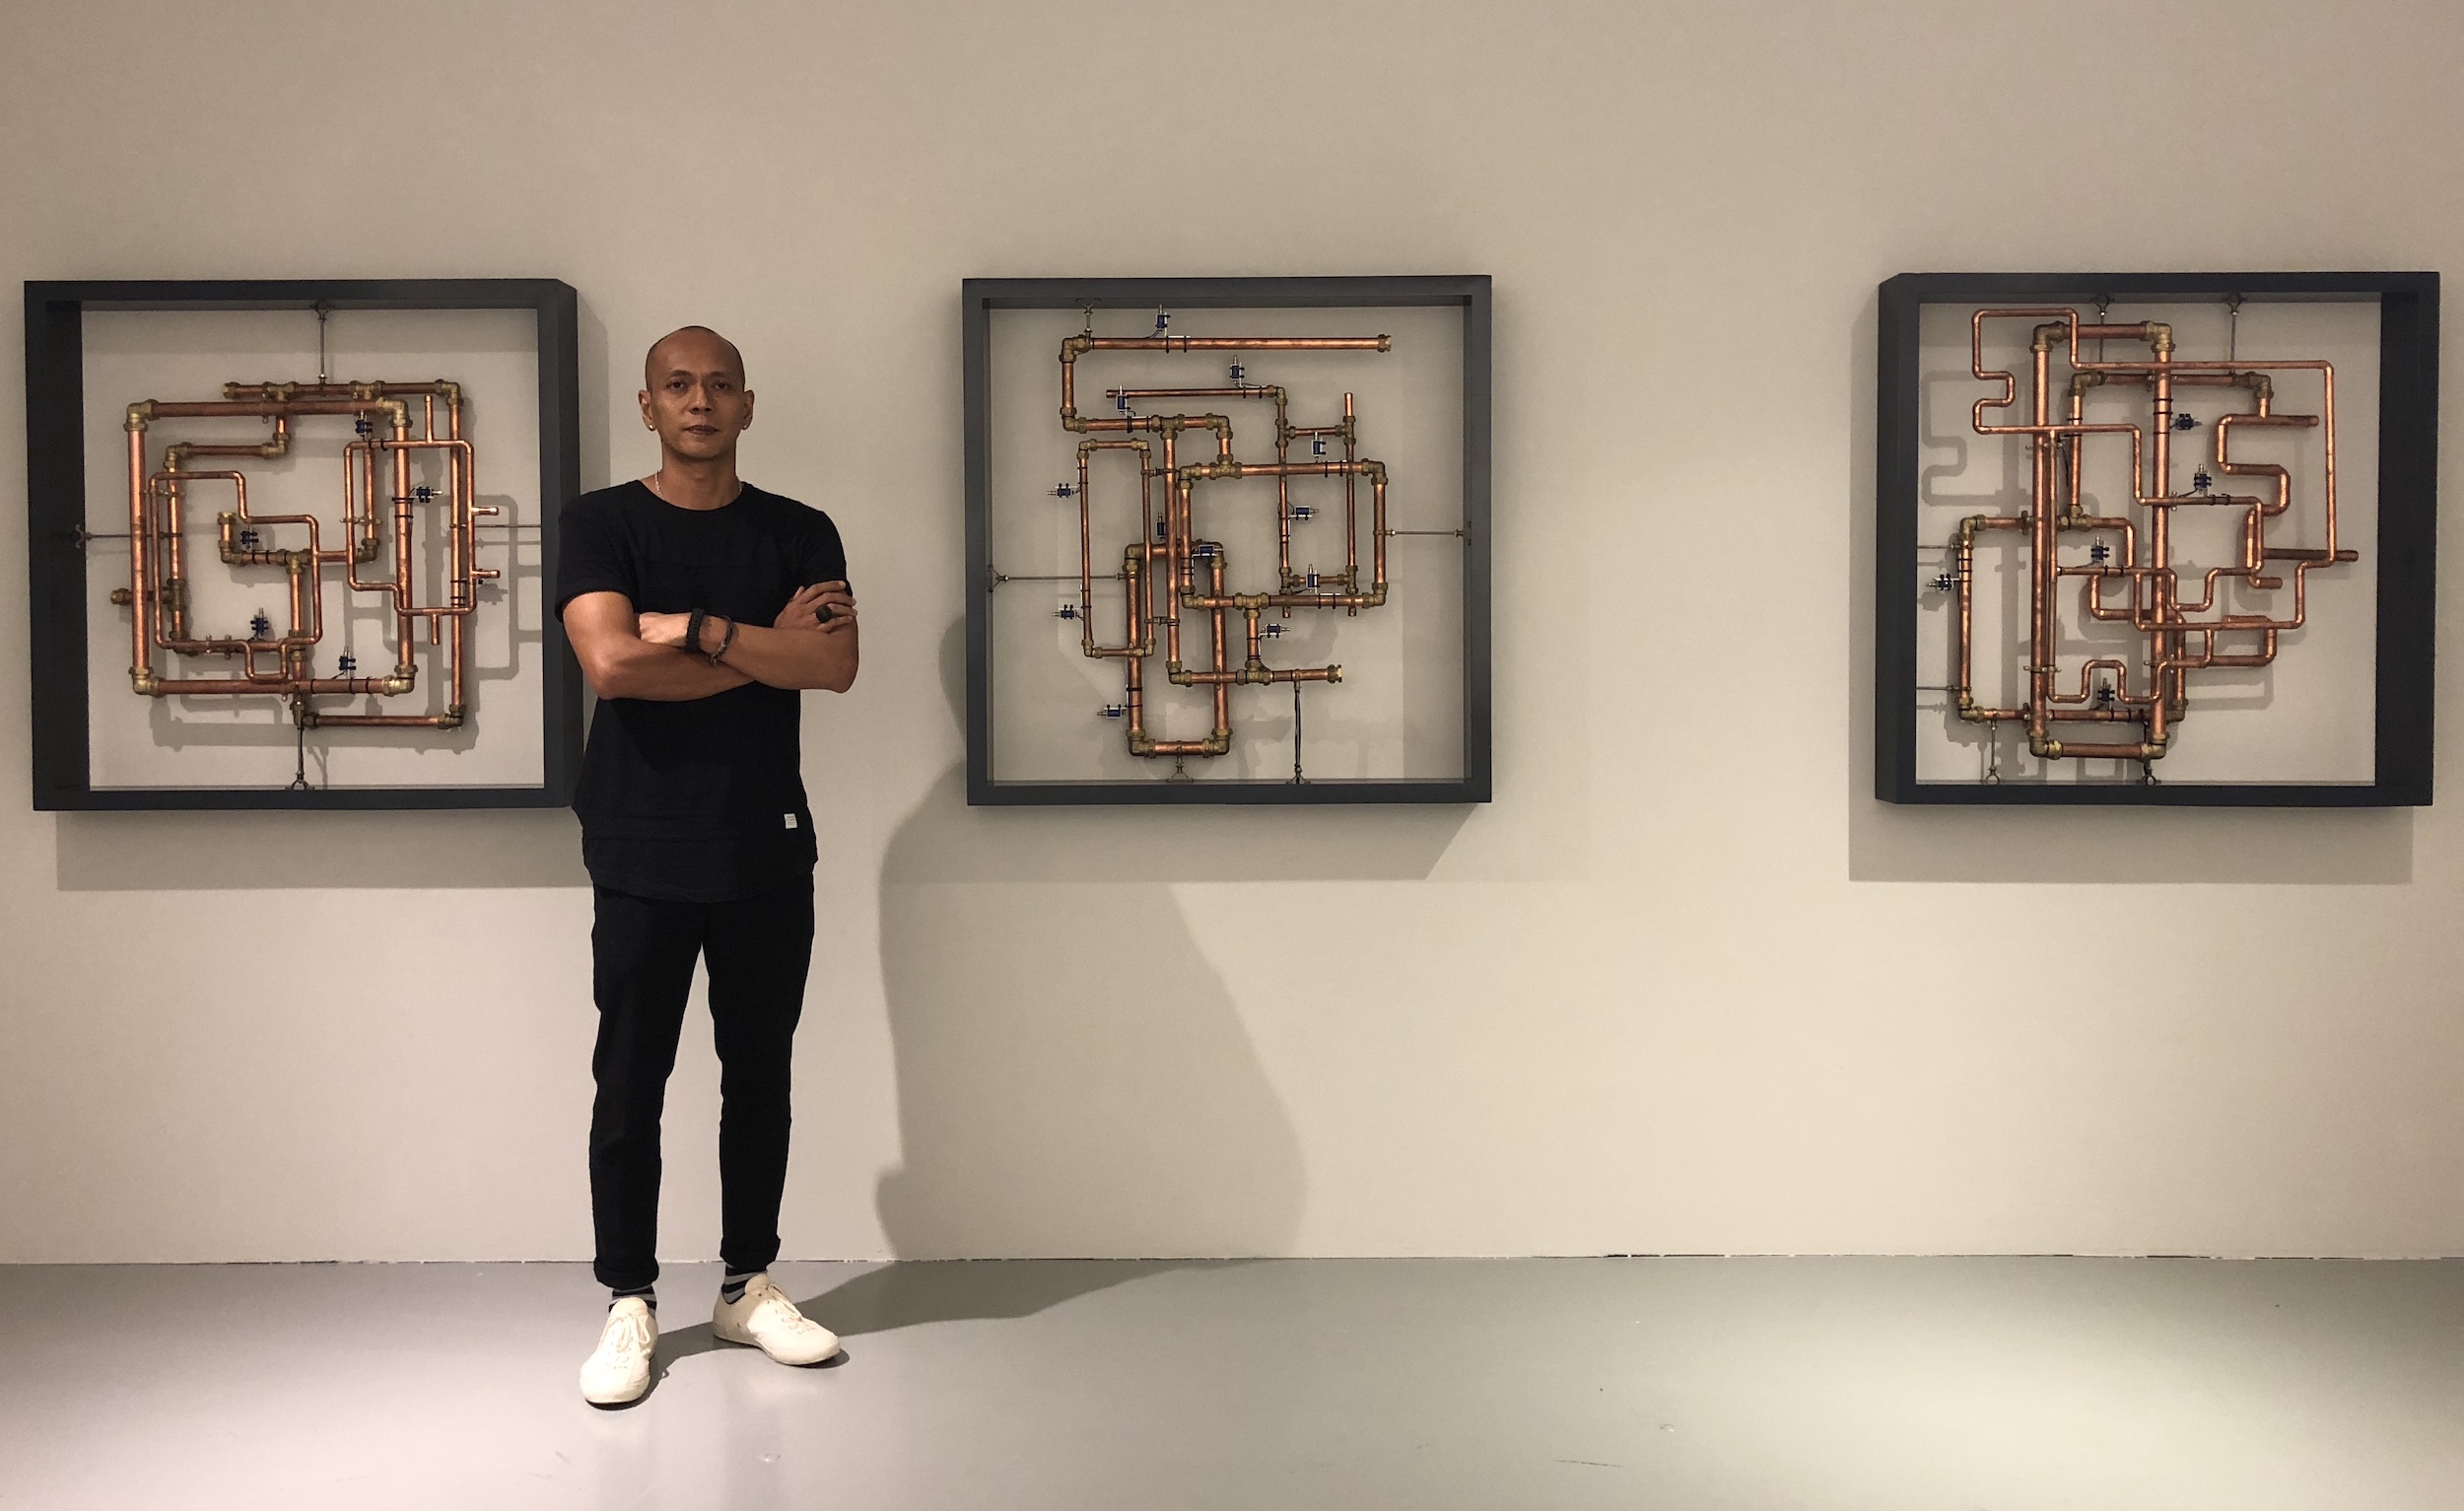 Zul at FOST Gallery with his Resonance in frames series, 2018.